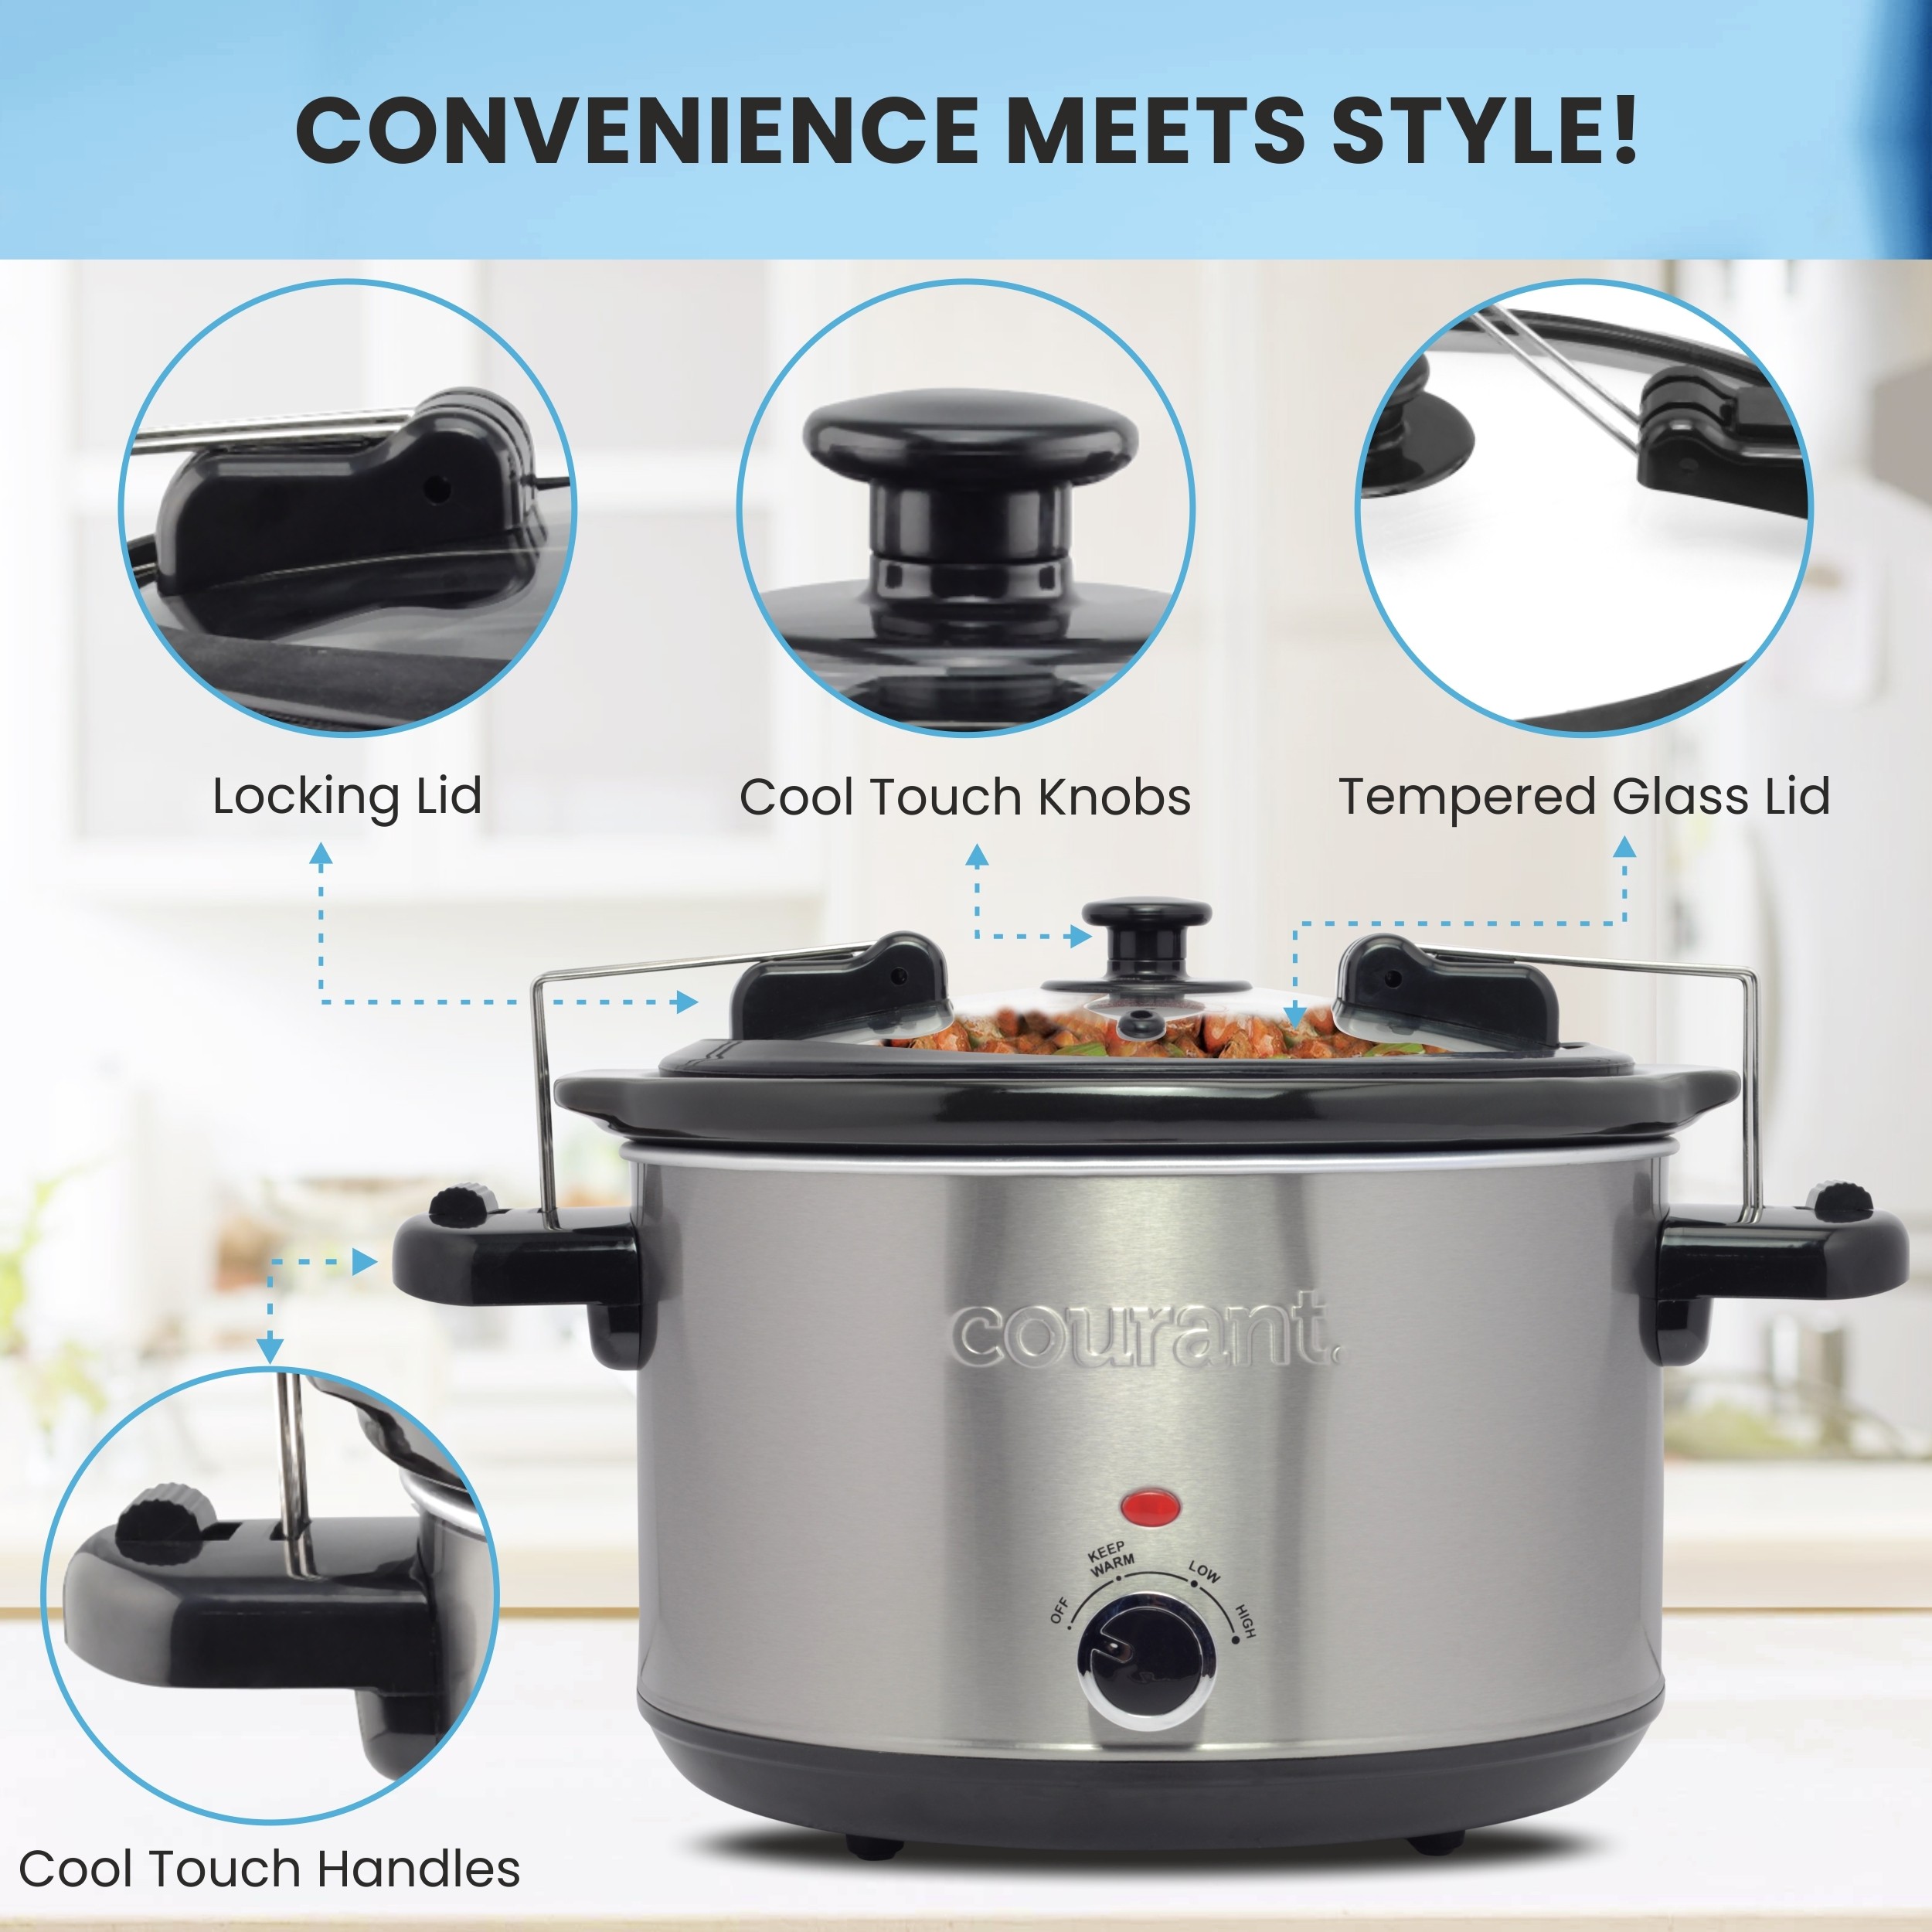 Courant 6-Qt. Slow Cooker with Locking Lid, Warm Settings, Stainproof Stoneware Pots, Stainless Steel, Silver